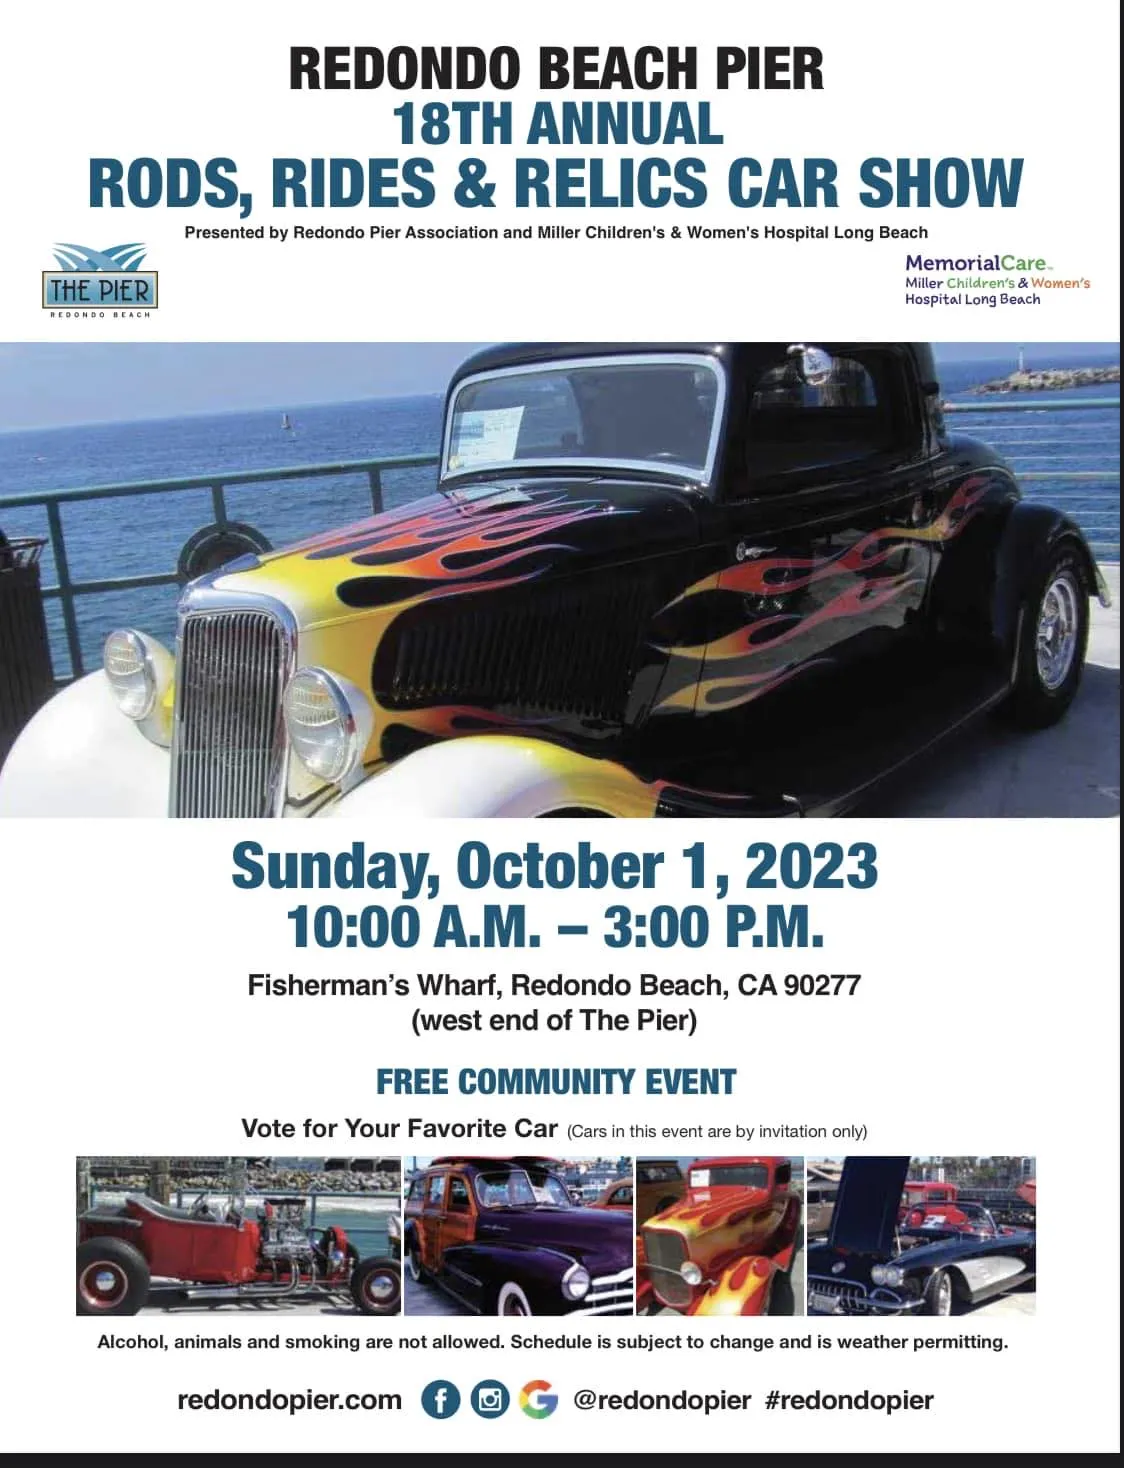 18th Annual Rods, Rides & Relics Car Show on The Pier Flyer